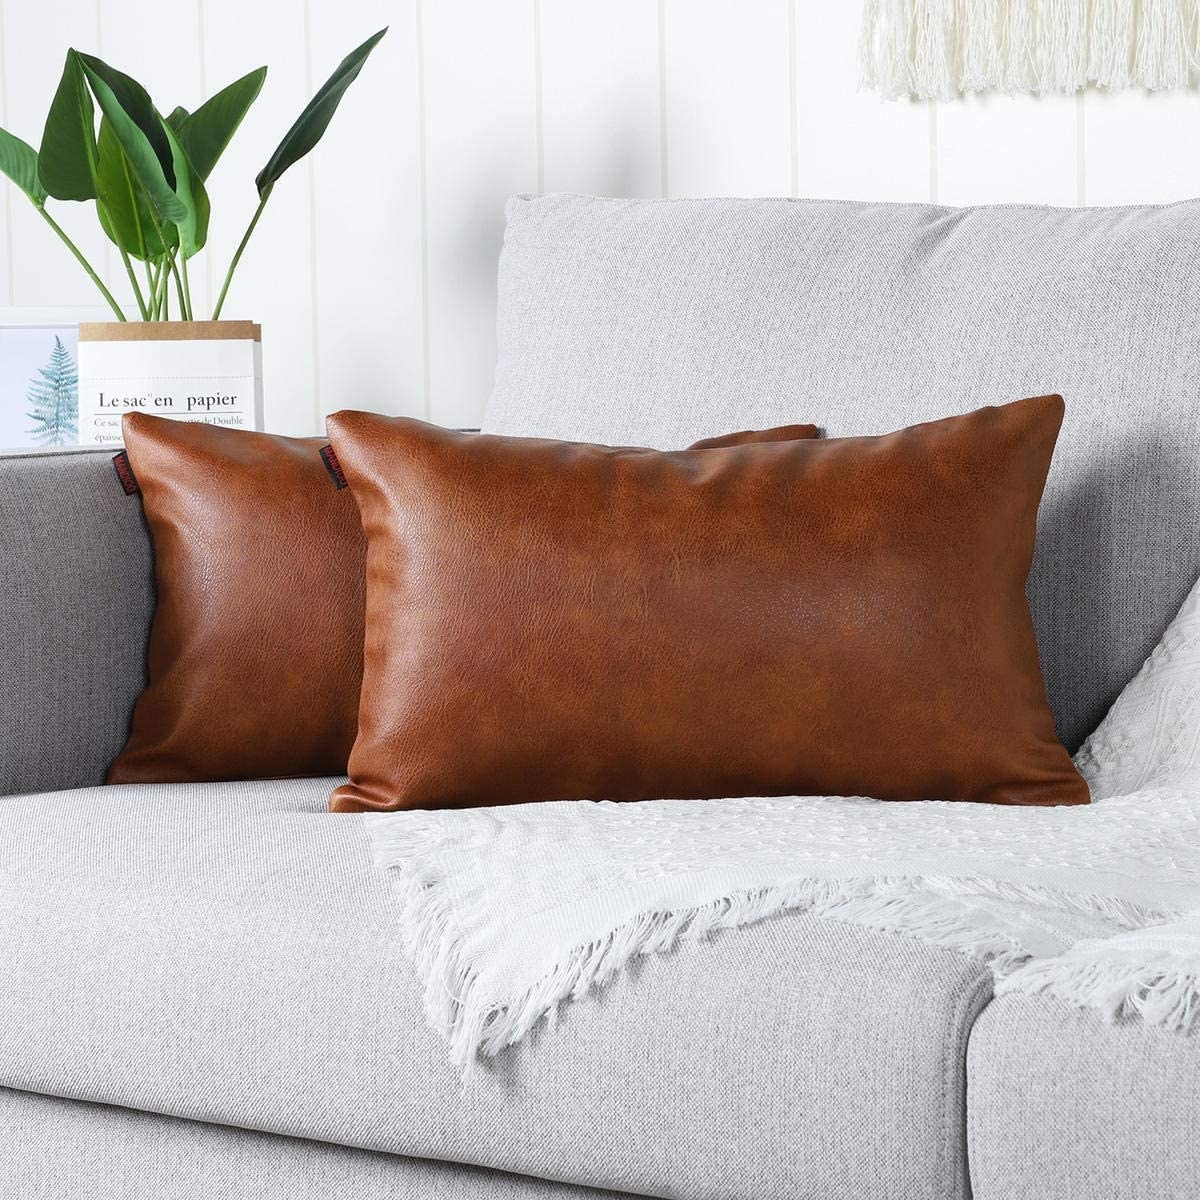 Two throw pillows on a couch in the cushion covers